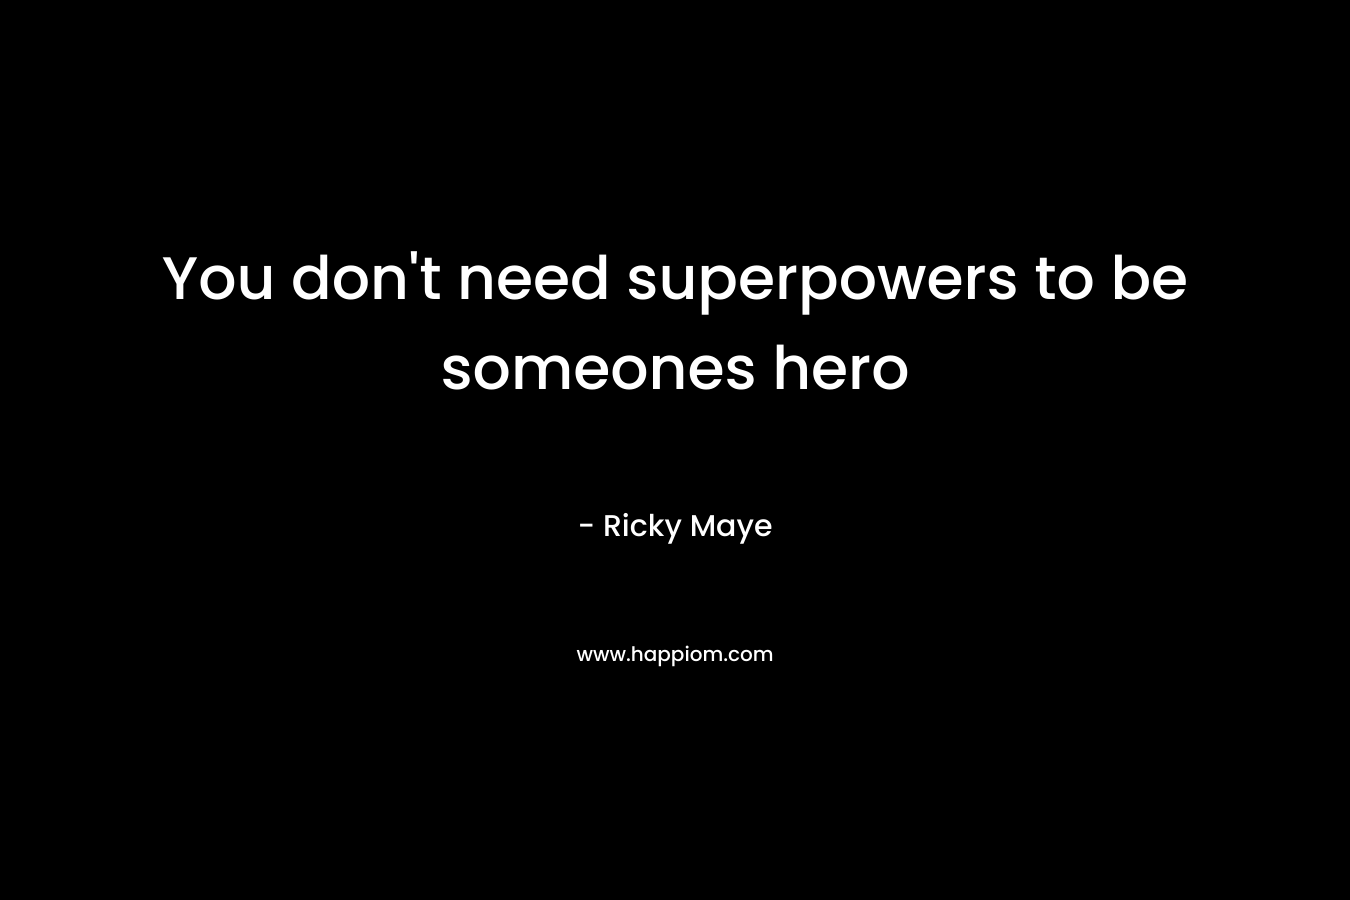 You don't need superpowers to be someones hero